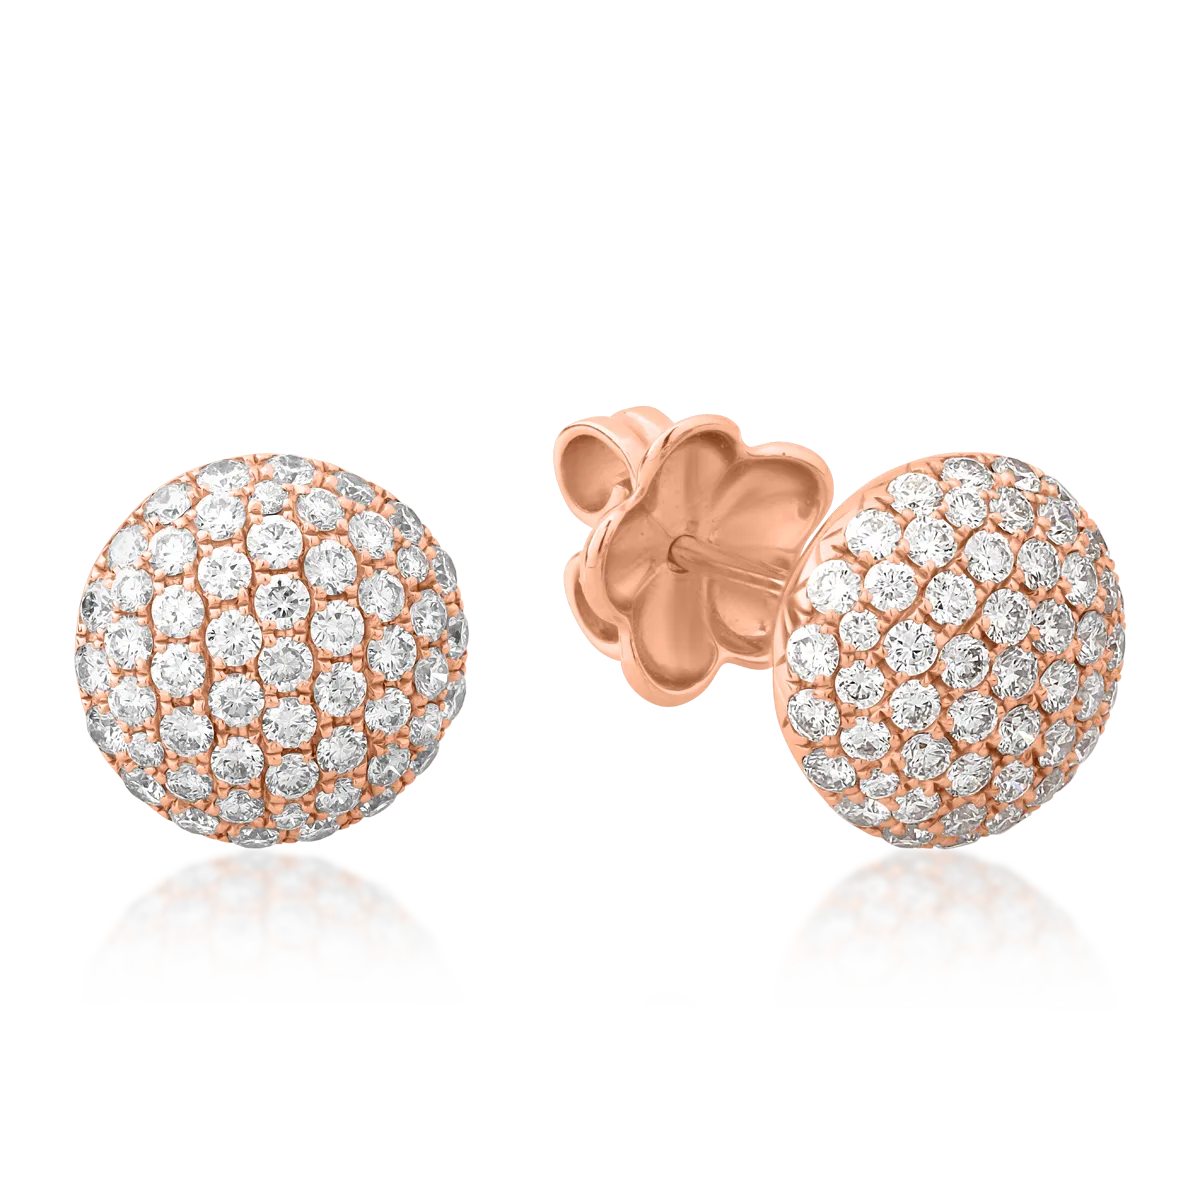 18K rose gold earrings with 1.76ct diamonds